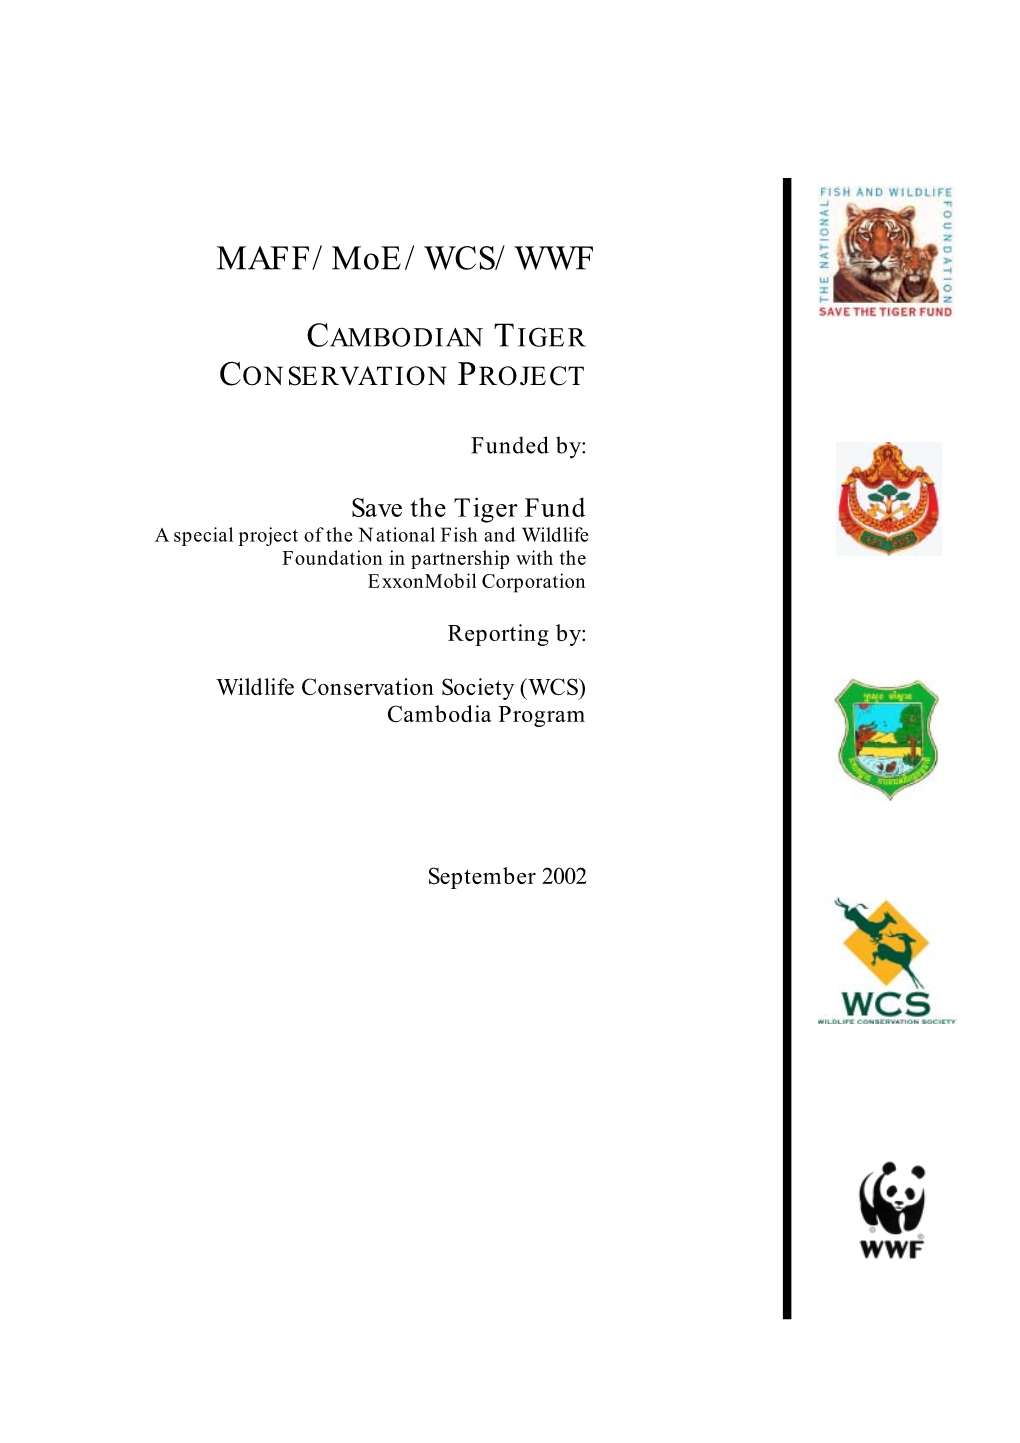 Conservation Project